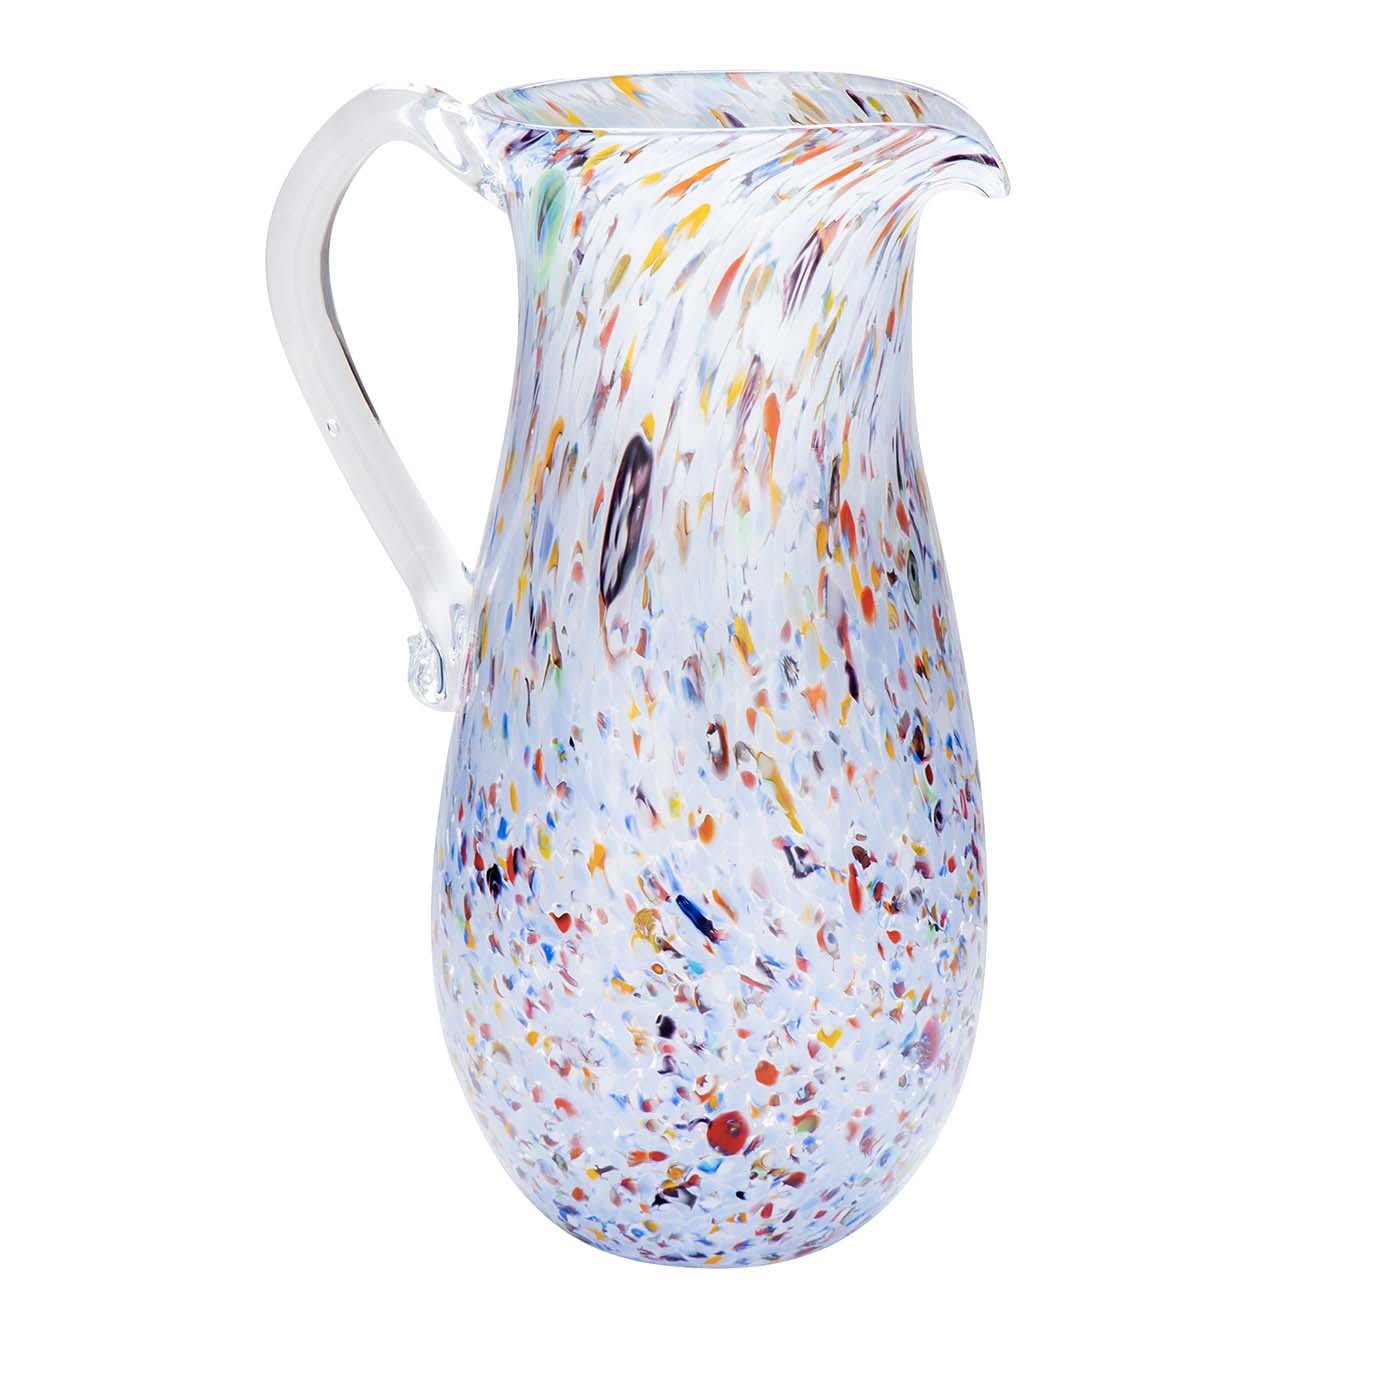 GO.TO Periwinkle Water Pitcher - Wave Murano Glass by Roberto Beltrami